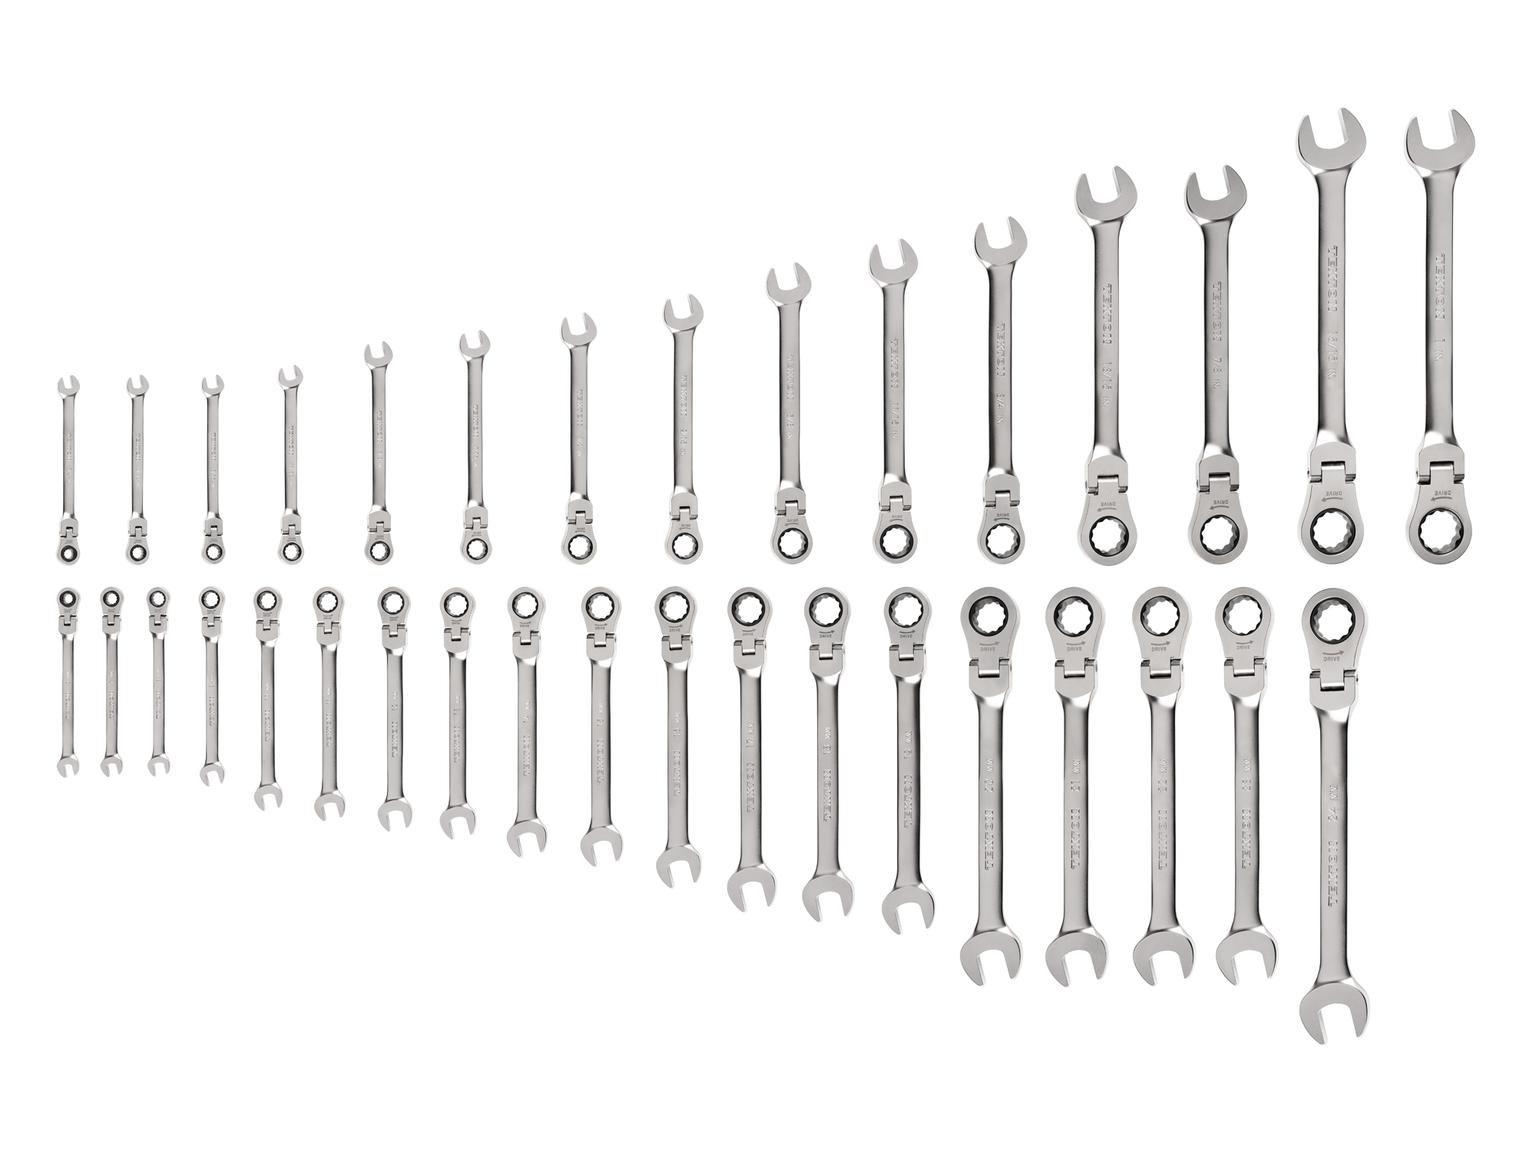 TEKTON WRC95005-T Flex Head 12-Point Ratcheting Combination Wrench Set, 34-Piece (1/4-1 in., 6-24 mm)